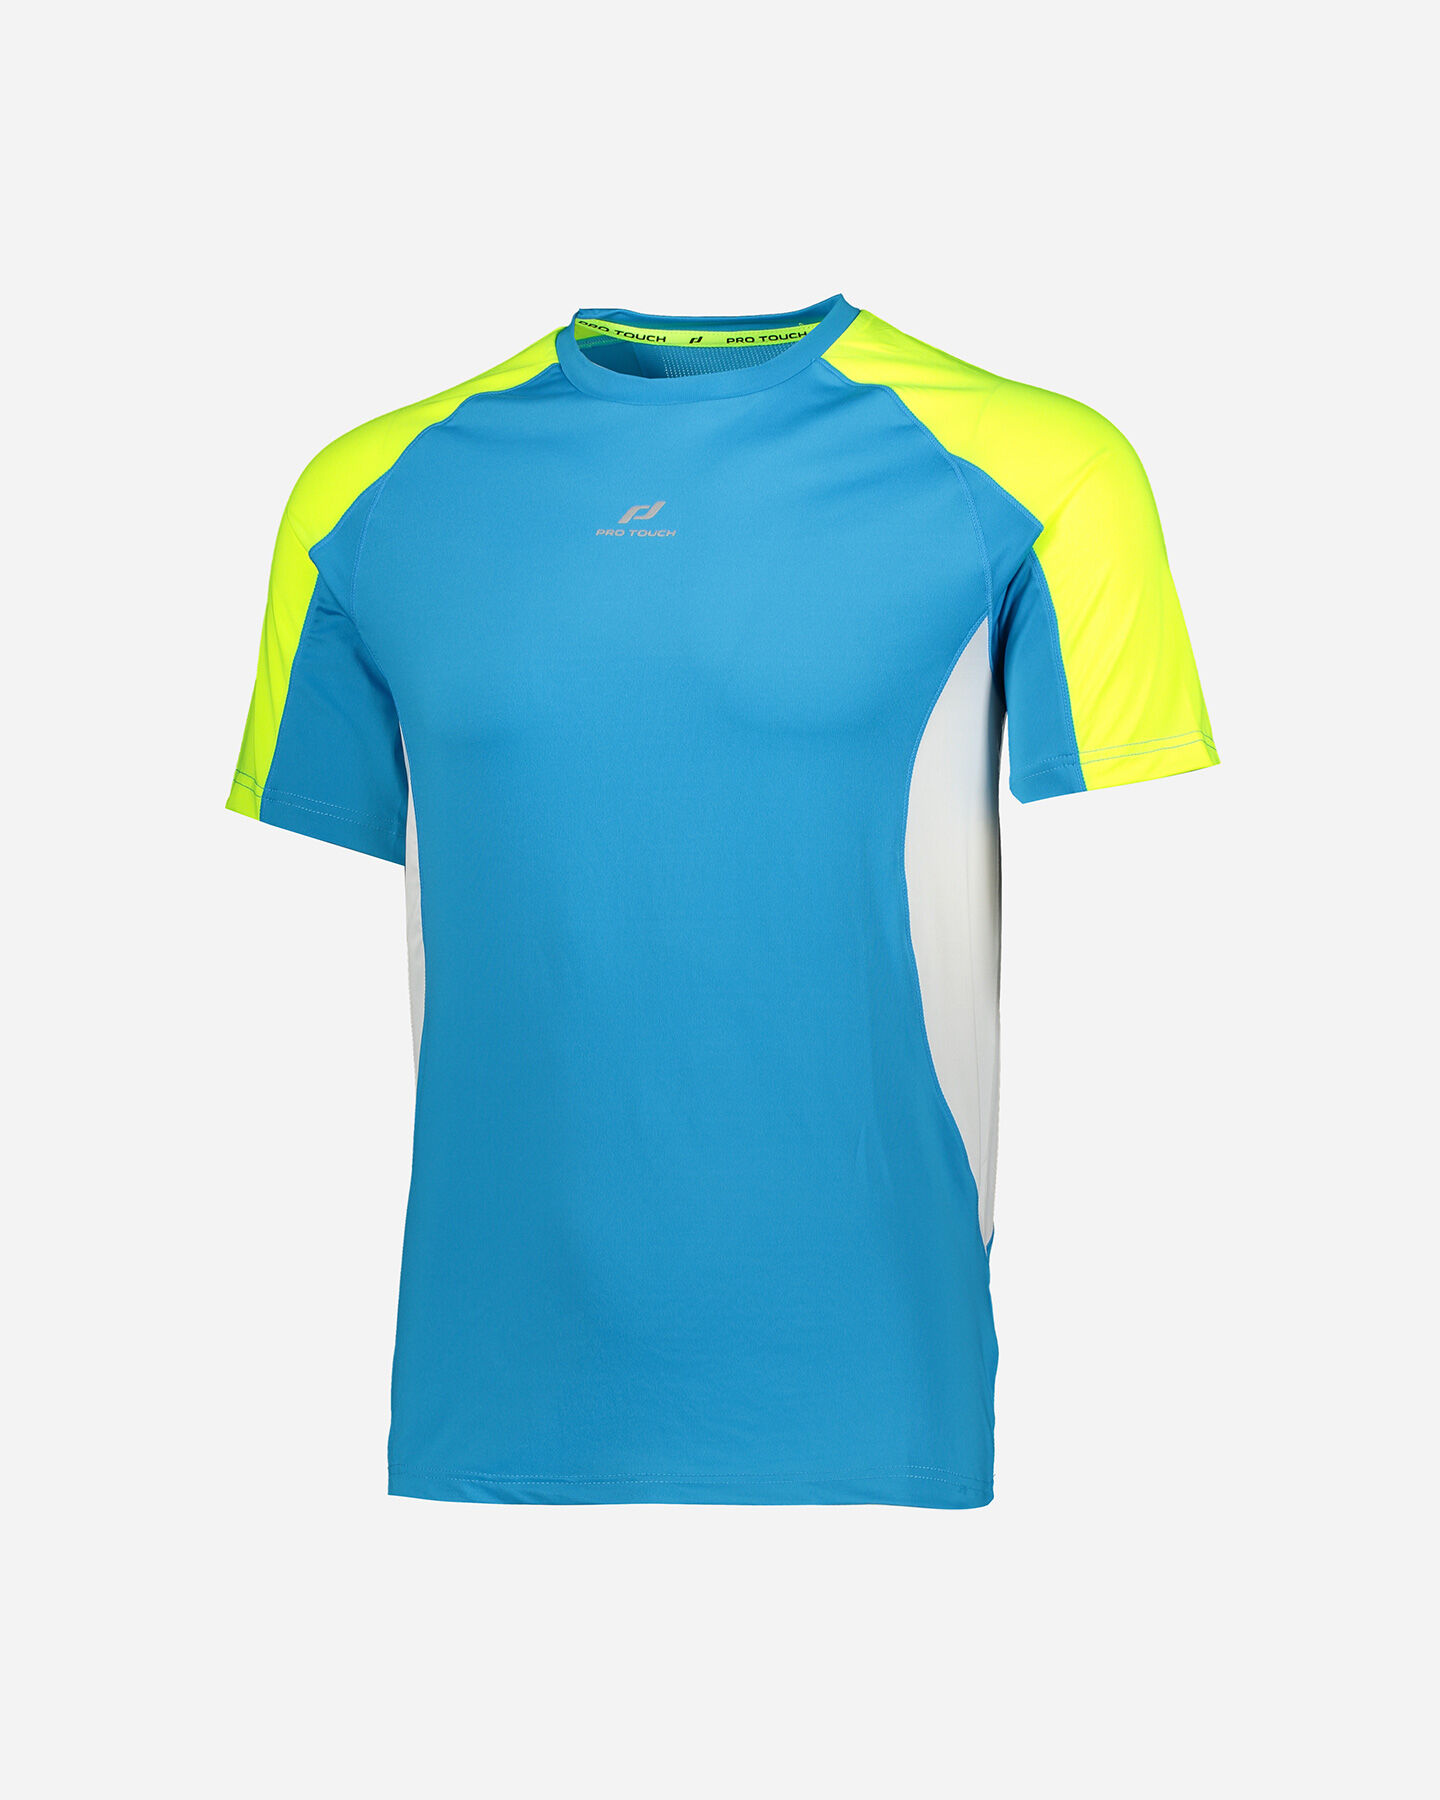  T-Shirt running PRO TOUCH INOS M S5172958|904|S scatto 0